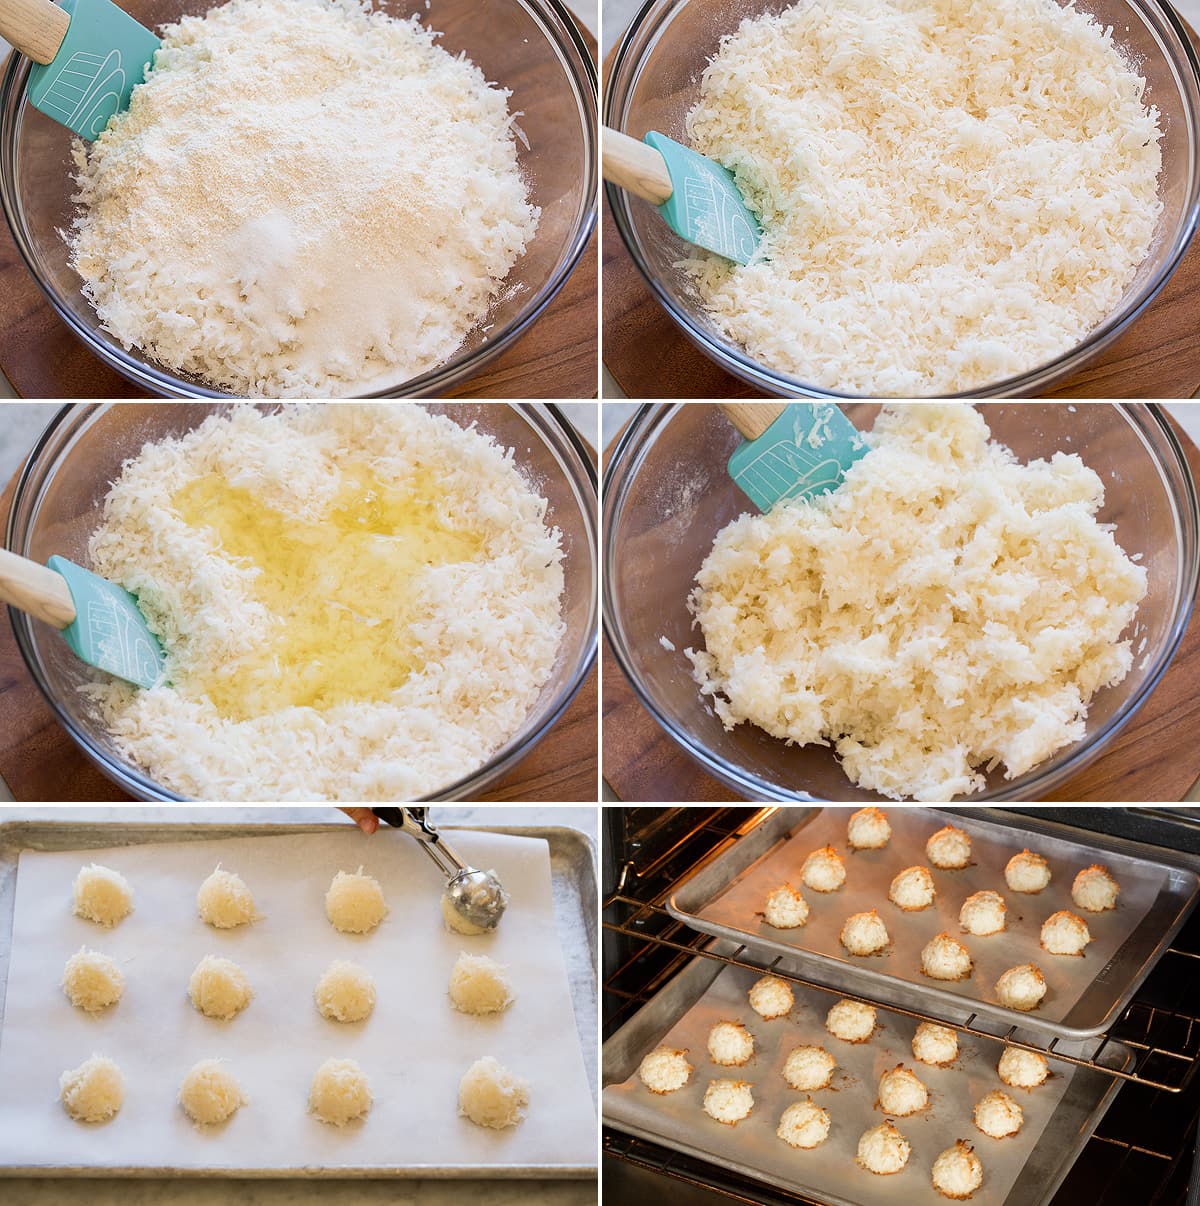 Collage of six images showing how to make coconut macaroon cookie dough then bake in baking sheets.